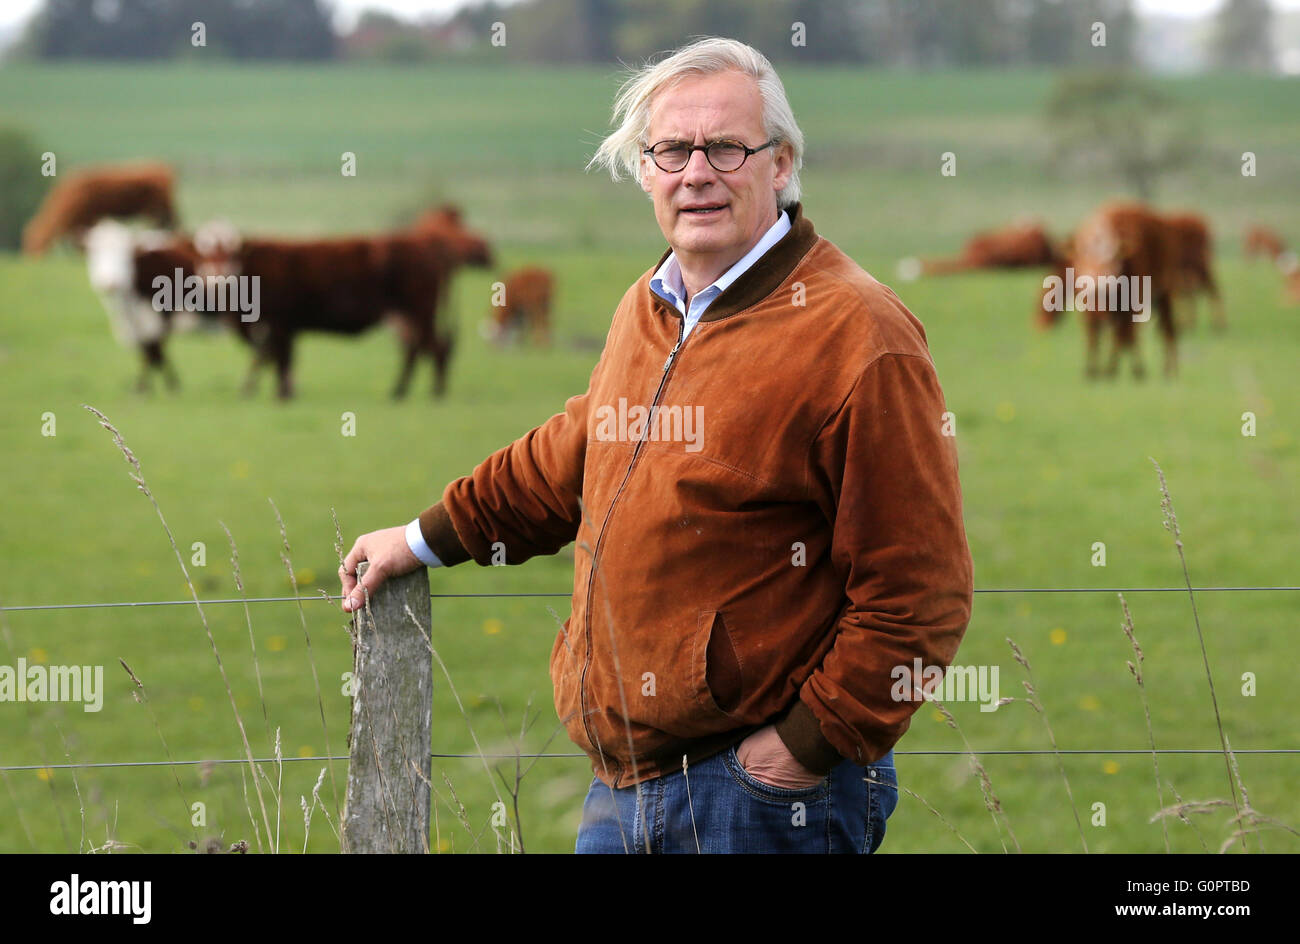 Heinrich Graf von Bassewitz stands in front of a cattle coupler on his farm ahead of the 11th States Meeting of Genetically Unmodified Regions in Dalwitz, Germany, 04 May 2016. Bassewitz was the initiator of the first genetically unmodified zone in Germany, founded in 2003. The genetically unmodified feeding of cattle is on the program at the 11th States Meeting of Genetically Unmodified Regions, organized by the BUND environmental protection organization. Essential to the project is the on-site cultivation of, for example, lupin, in order to not be reliant on genetically modified soy from abr Stock Photo